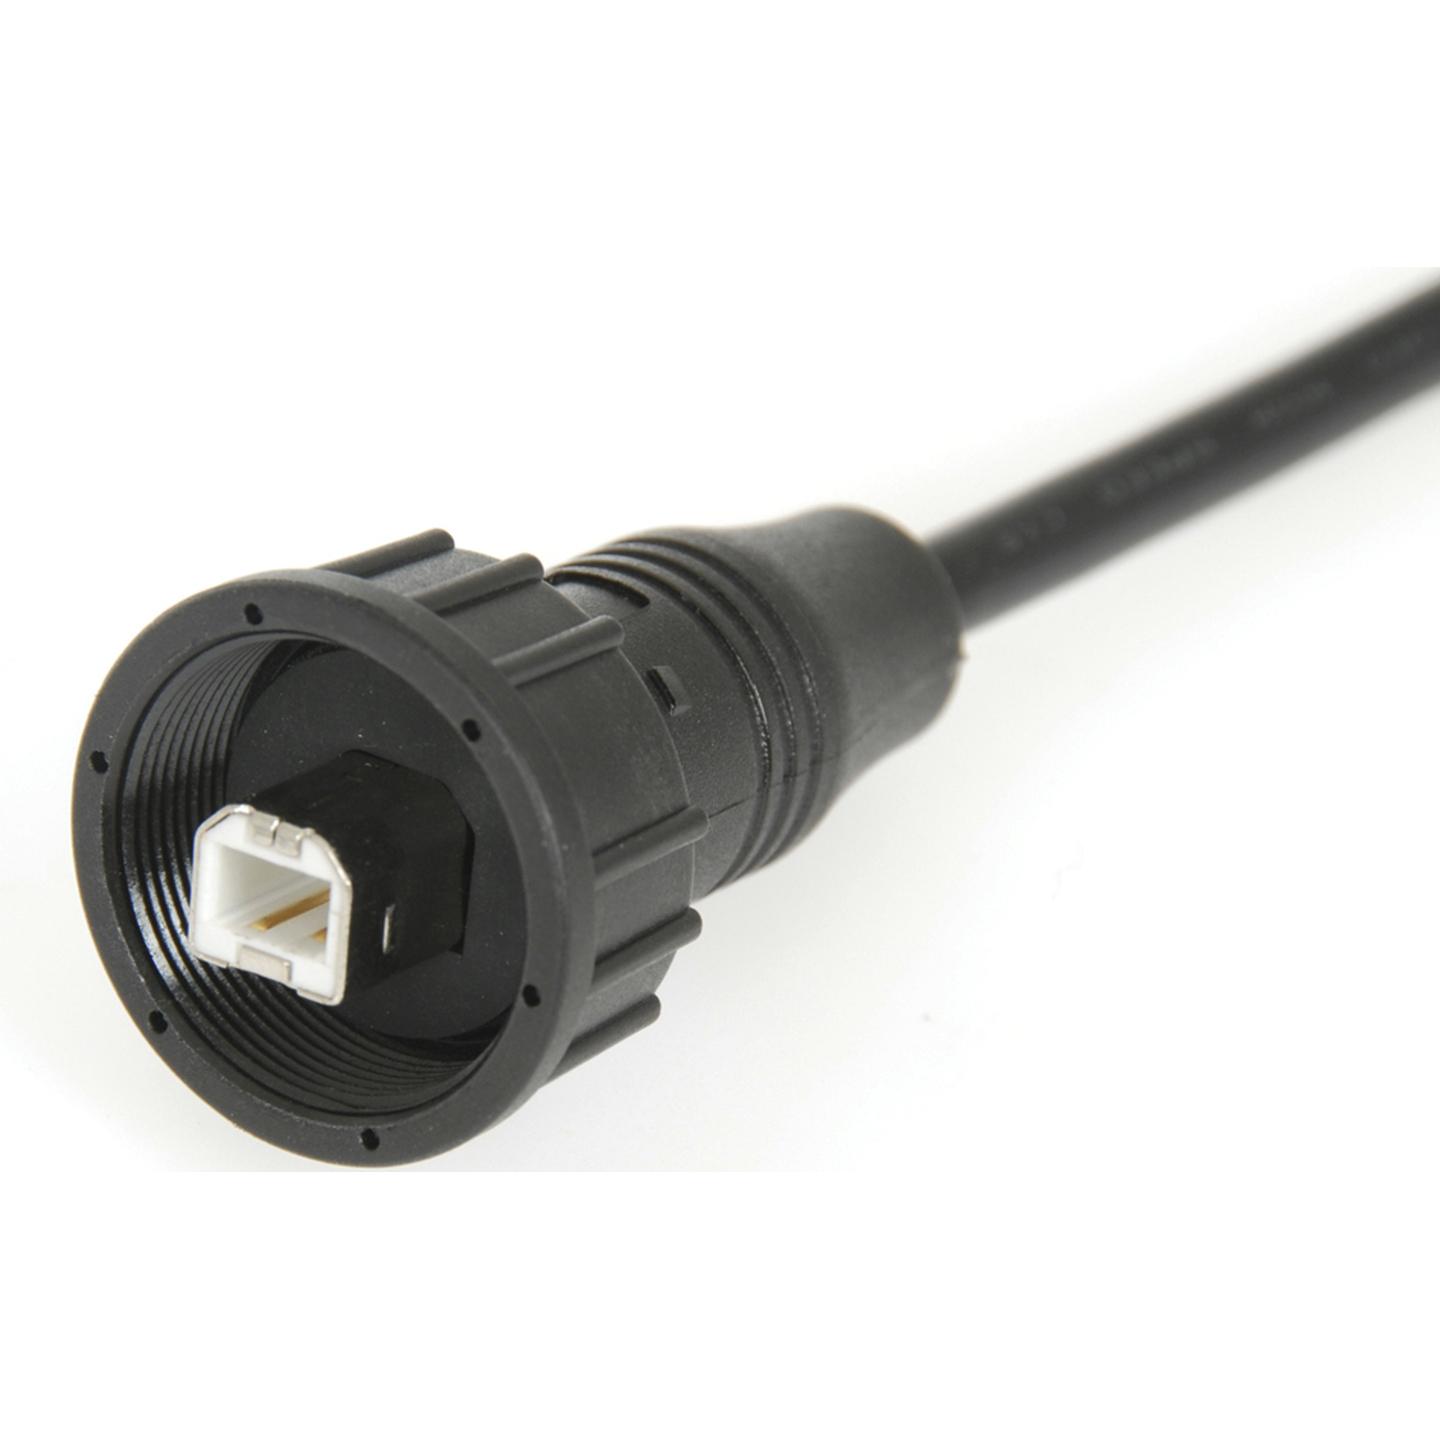 IP67 Rated Type B USB Socket Cable 1m